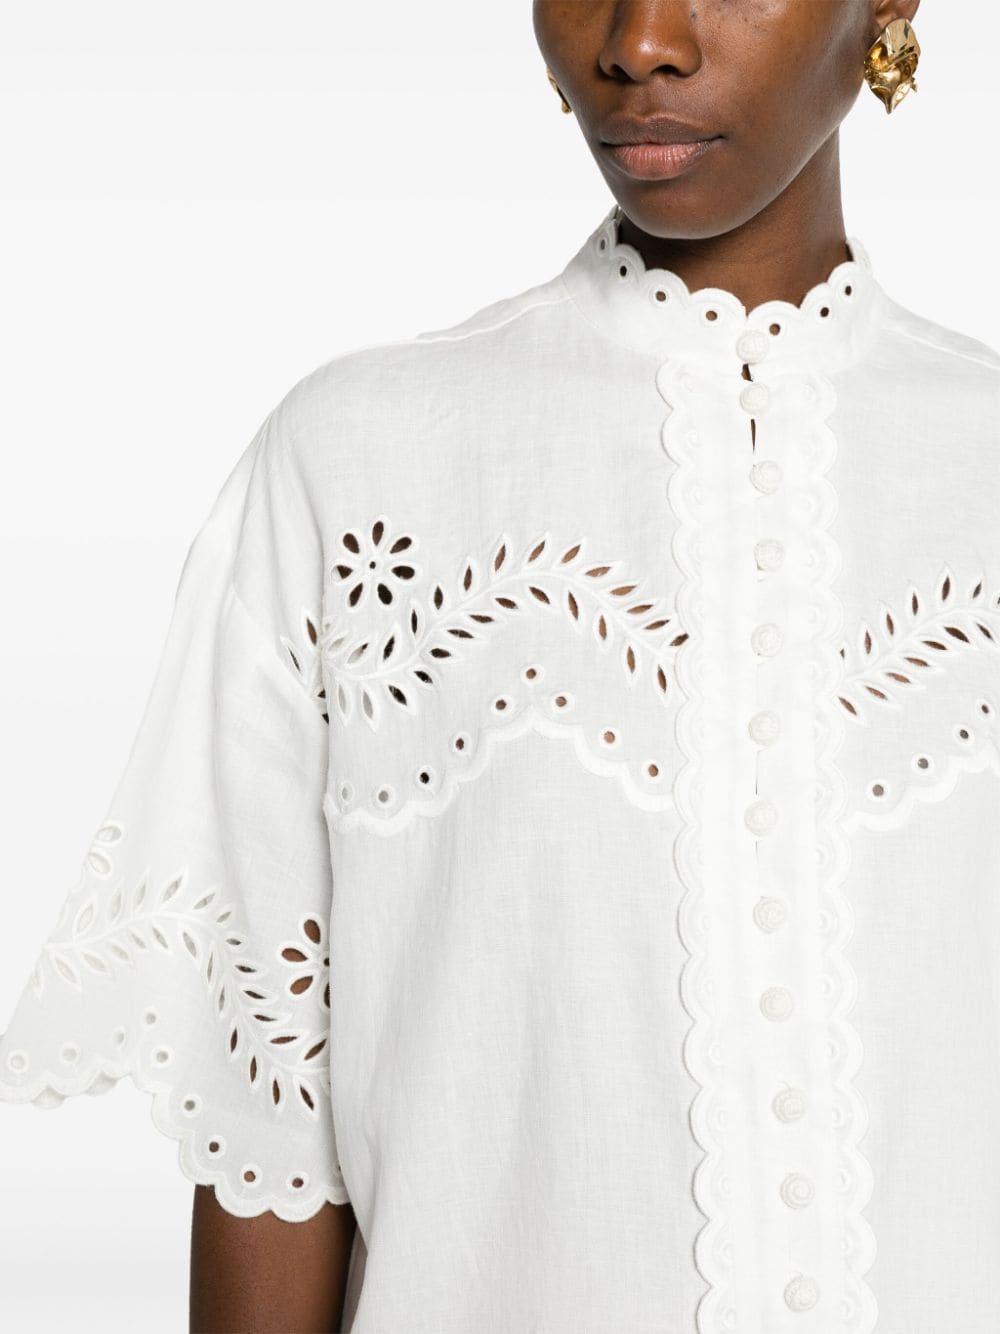 Junie Embroidered Shirt in Ivory